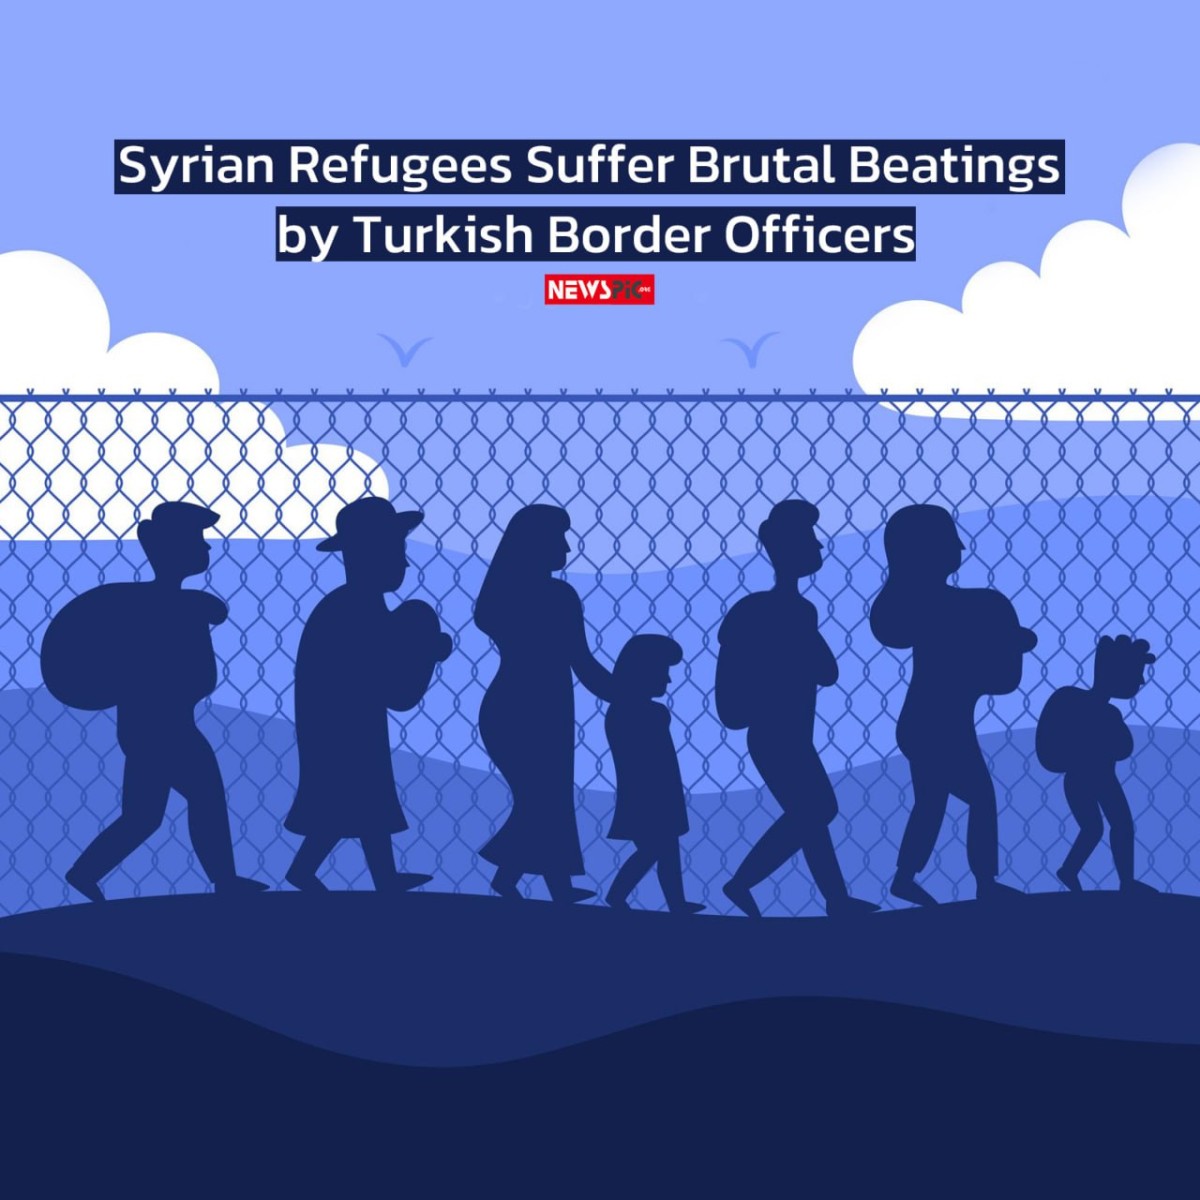 Syrian Refugees Suffer Brutal Beatings by Turkish Border Officers